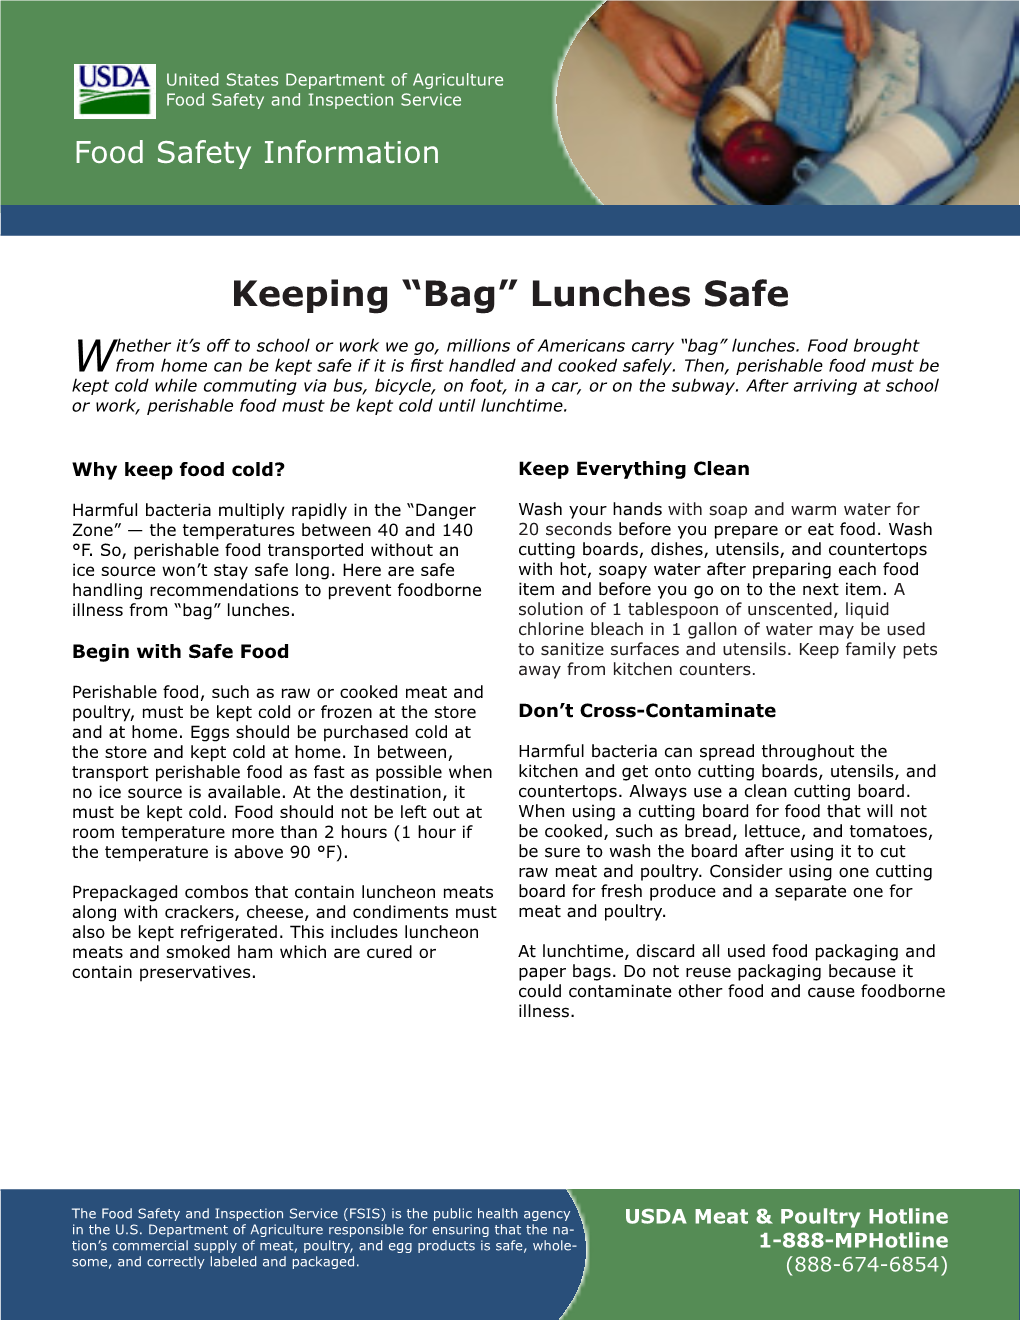 Keeping 'Bag' Lunches Safe